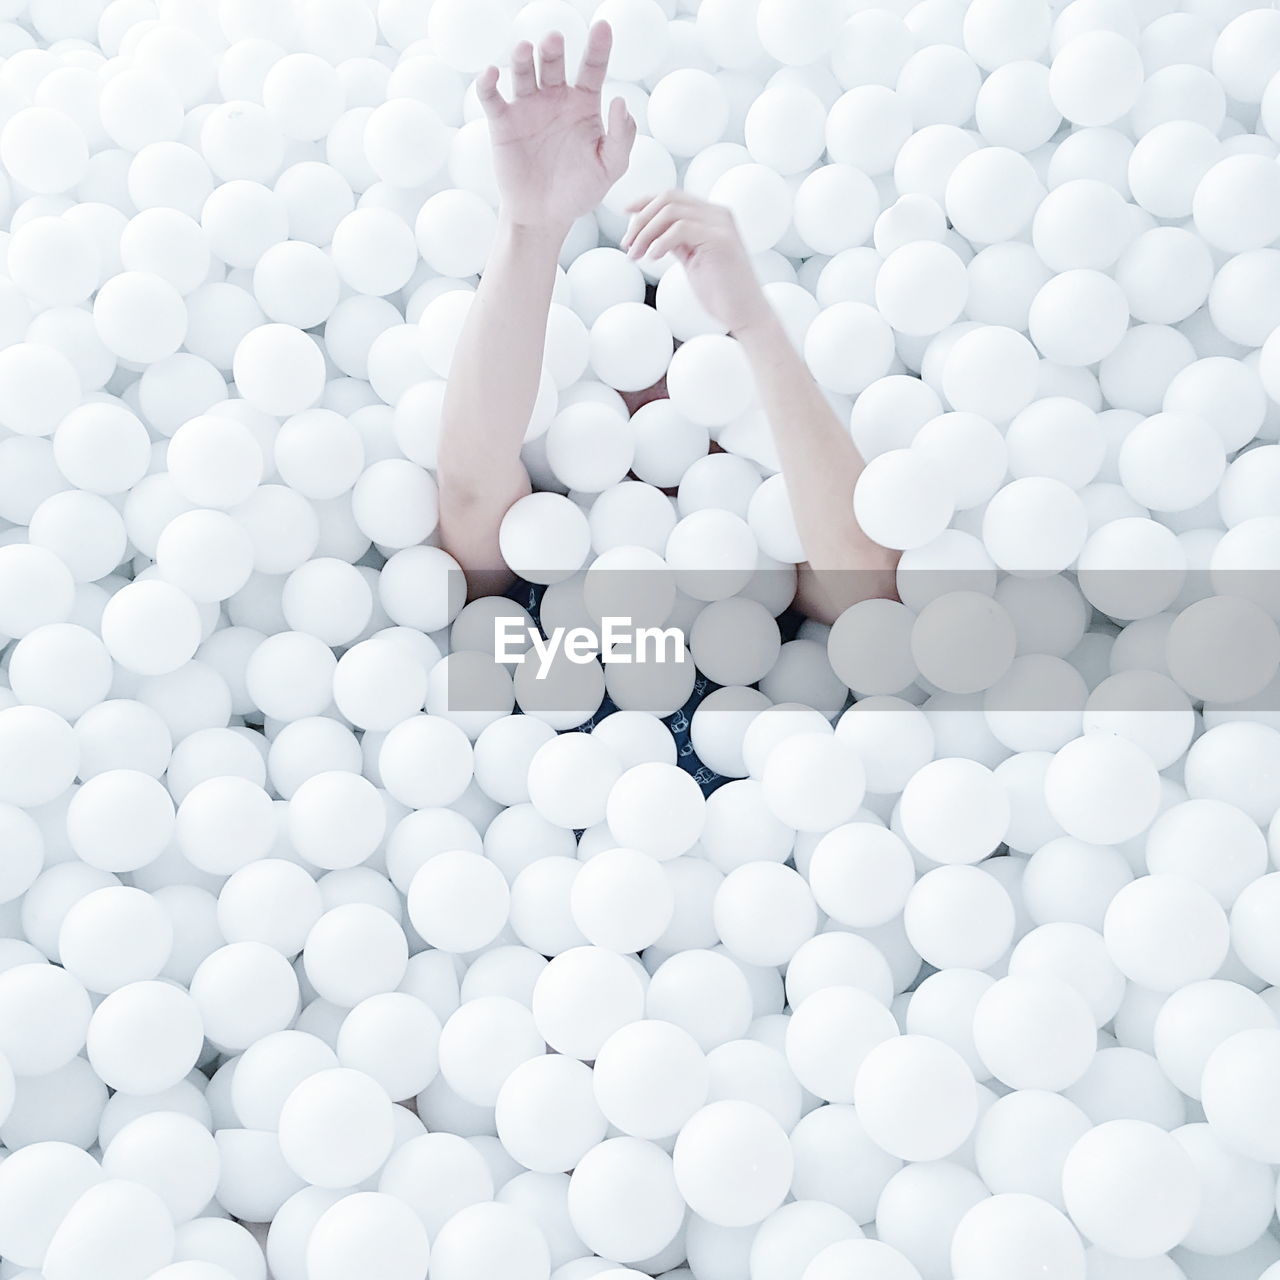 Cropped image of hand emitting from white ball pool